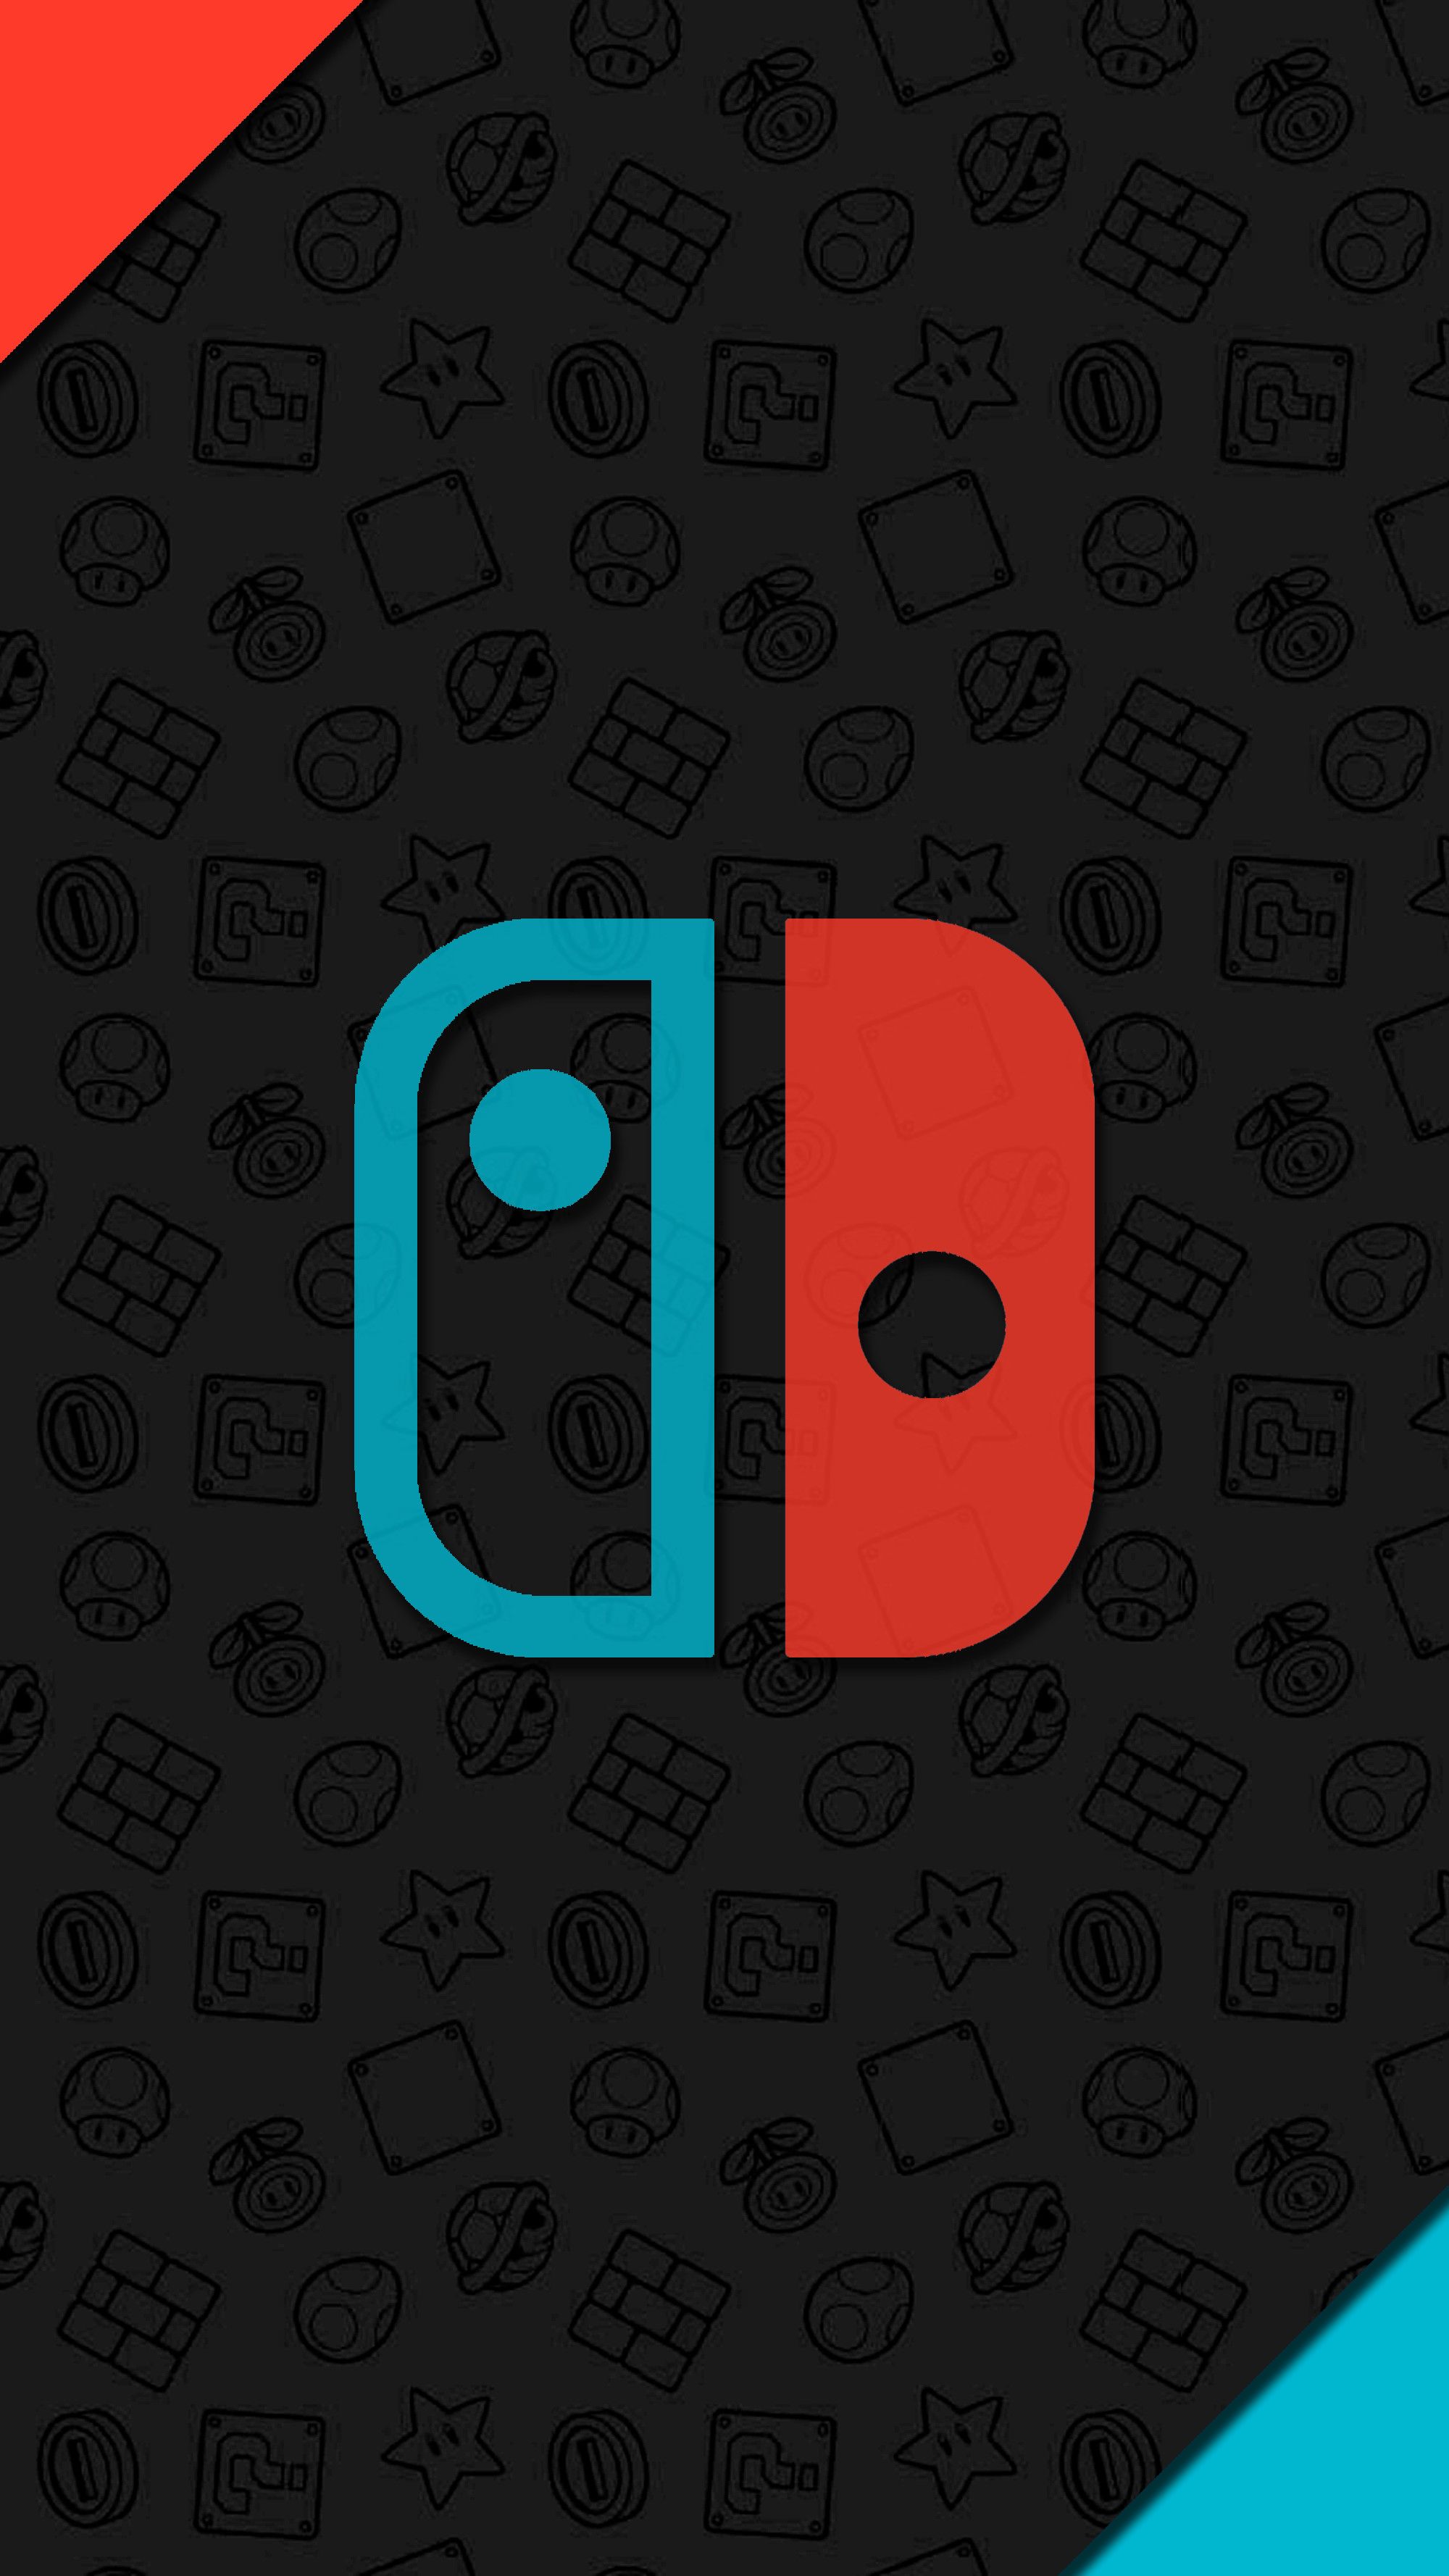 The nintendo logo is on a black and red background - Nintendo